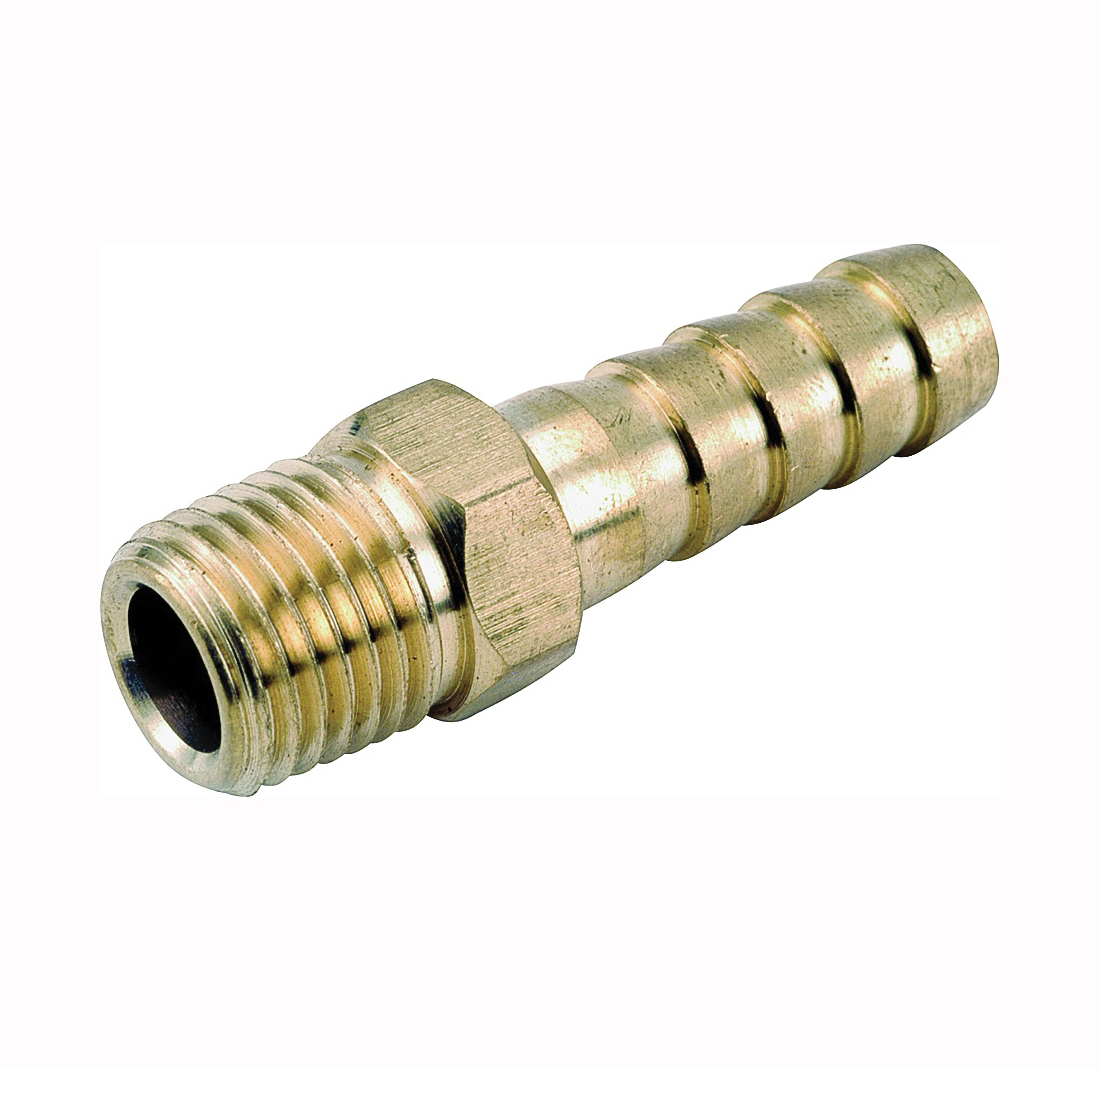 129 Series 757001-1008 Hose Adapter, 5/8 in, Barb, 1/2 in, MPT, Brass